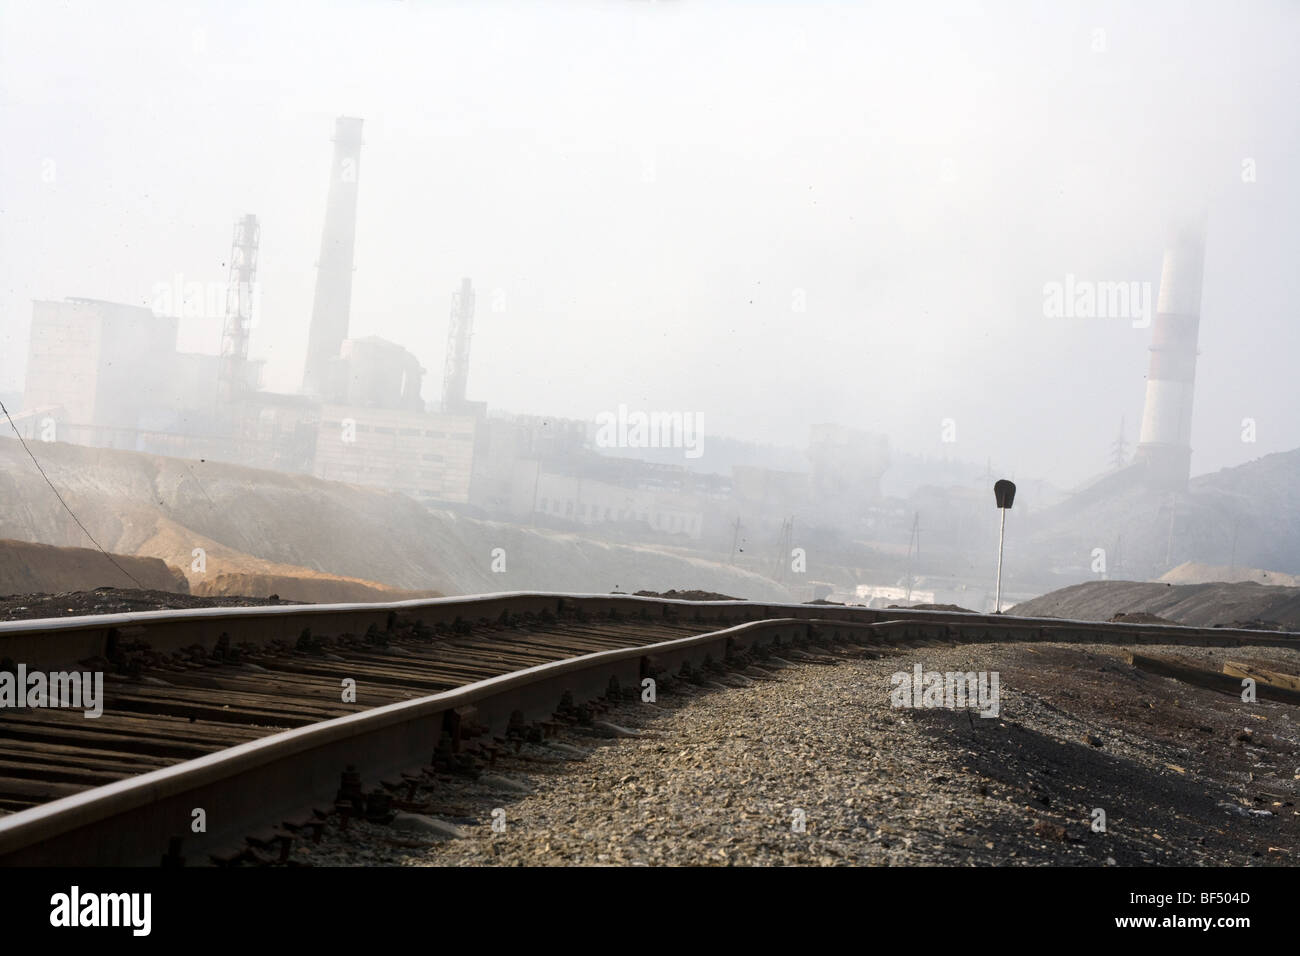 Railway track leading to copper smelting works in pollution haze, Karabash, Urals, Russia Stock Photo